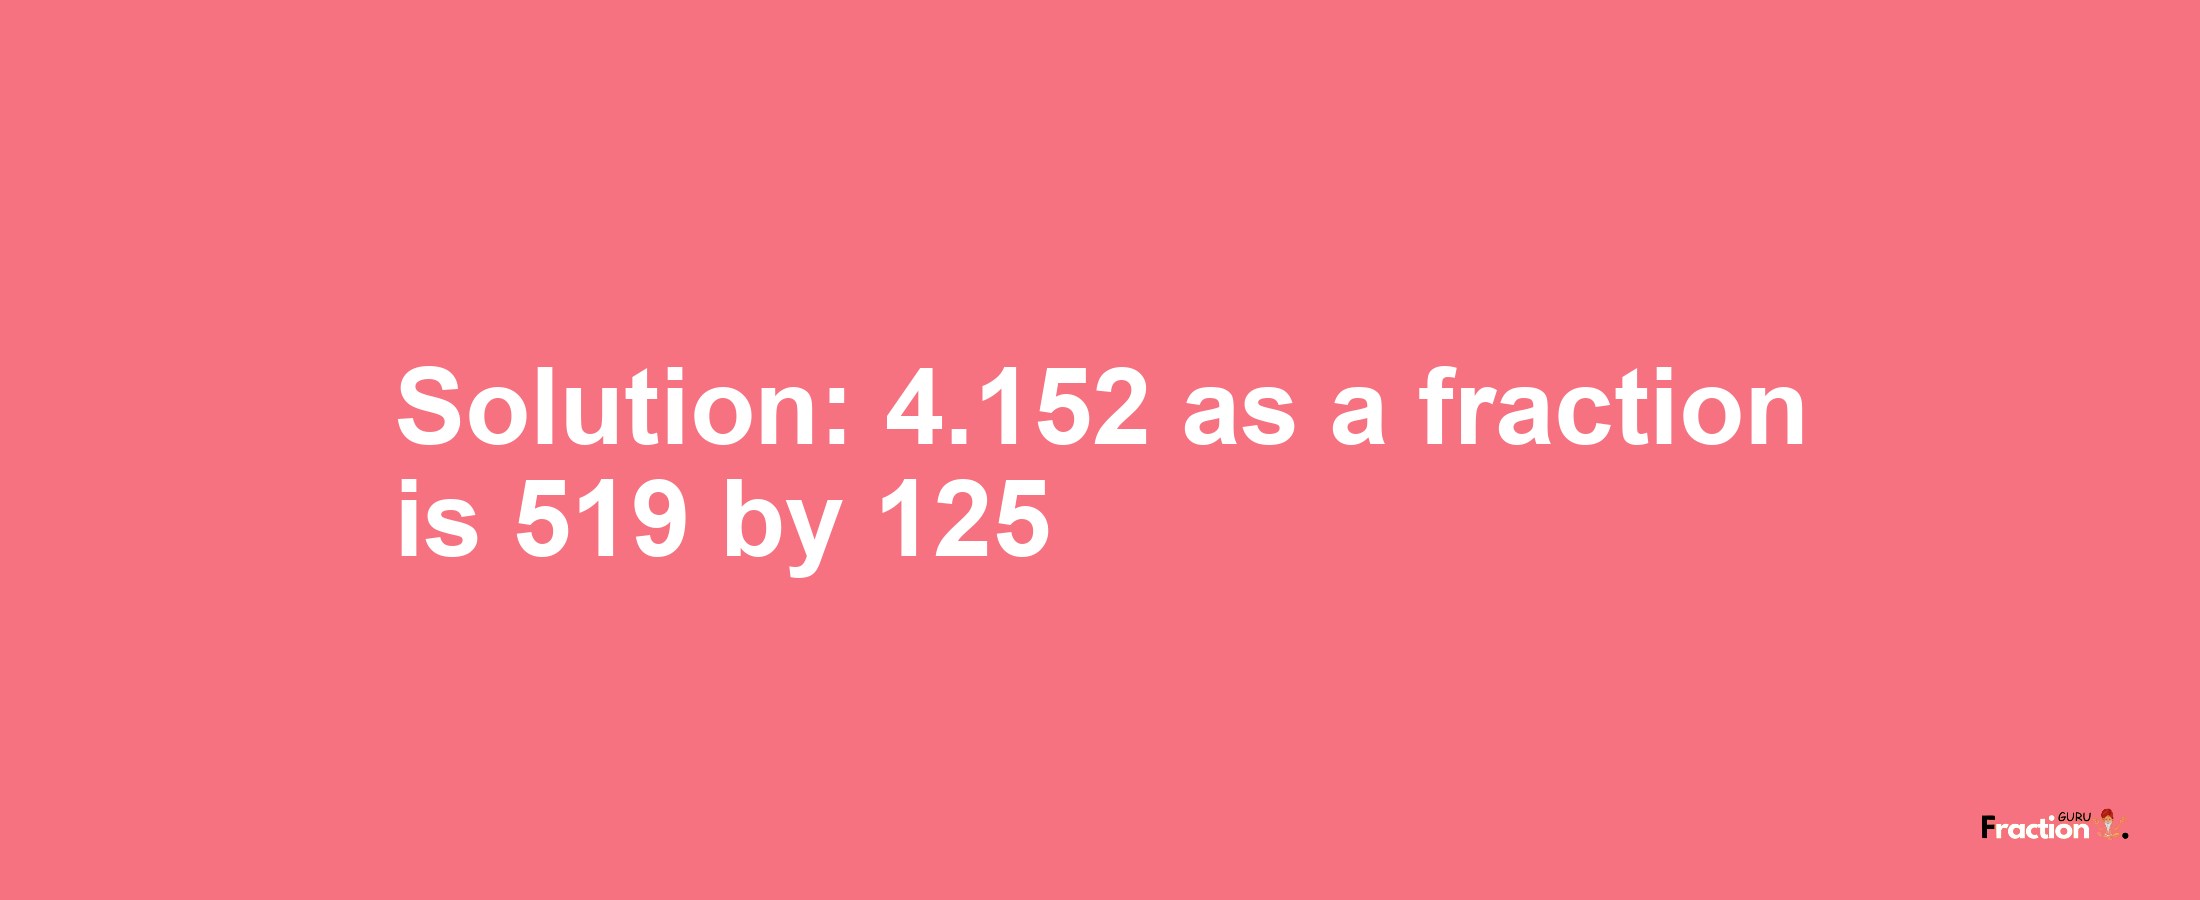 Solution:4.152 as a fraction is 519/125